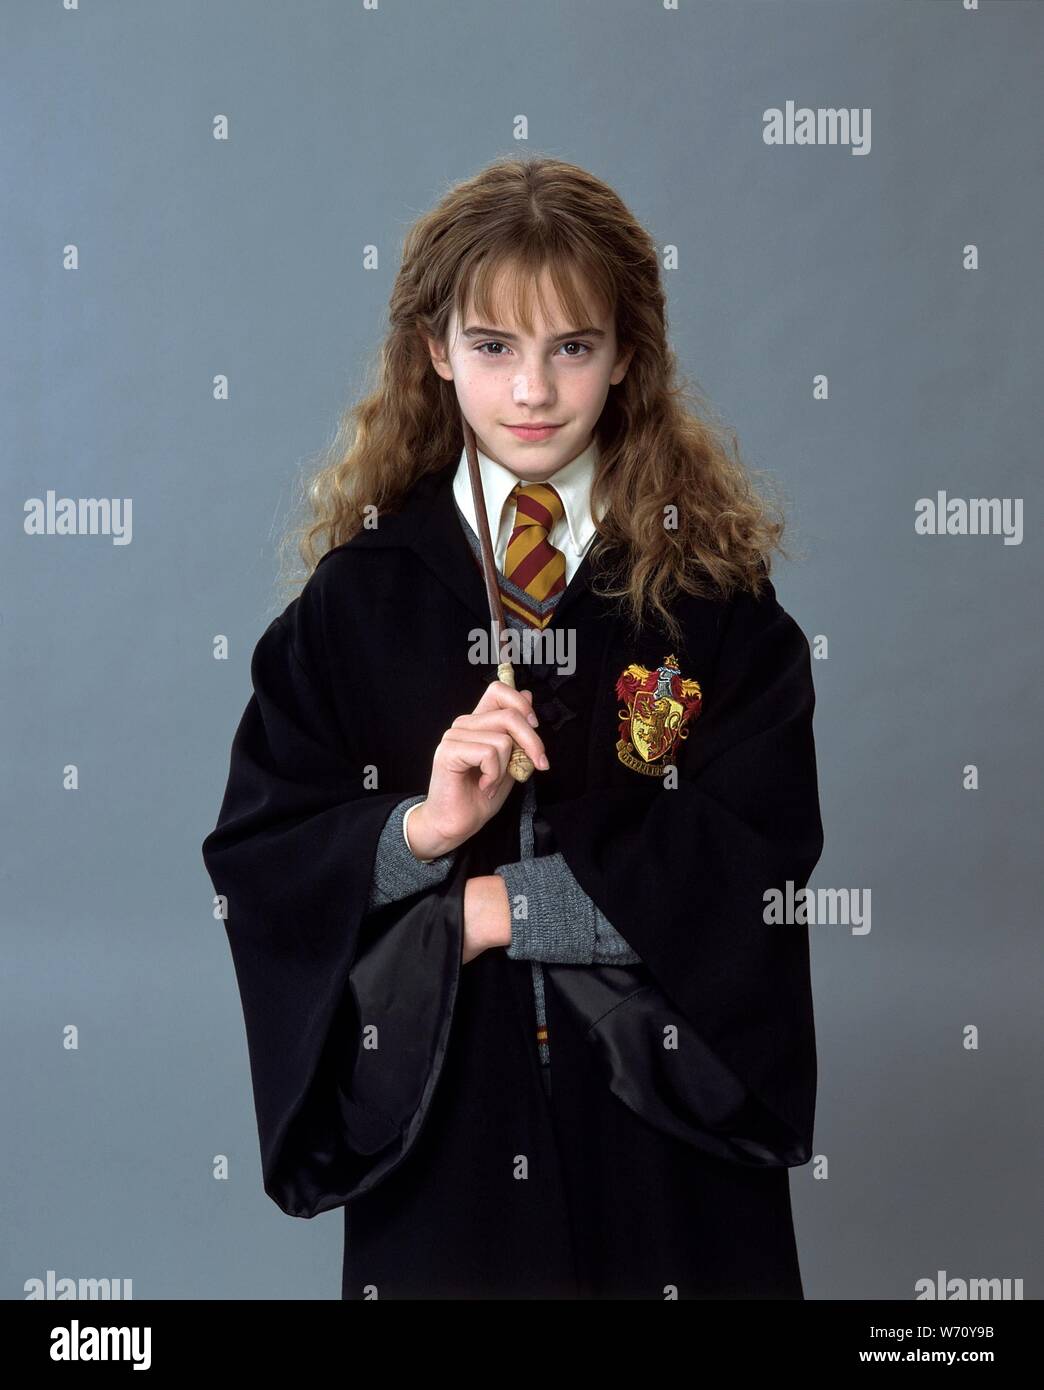 EMMA WATSON in HARRY POTTER AND THE CHAMBER OF SECRETS (2002), directed by  CHRIS COLUMBUS. Credit: WARNER BROS. PICTURES / Album Stock Photo - Alamy